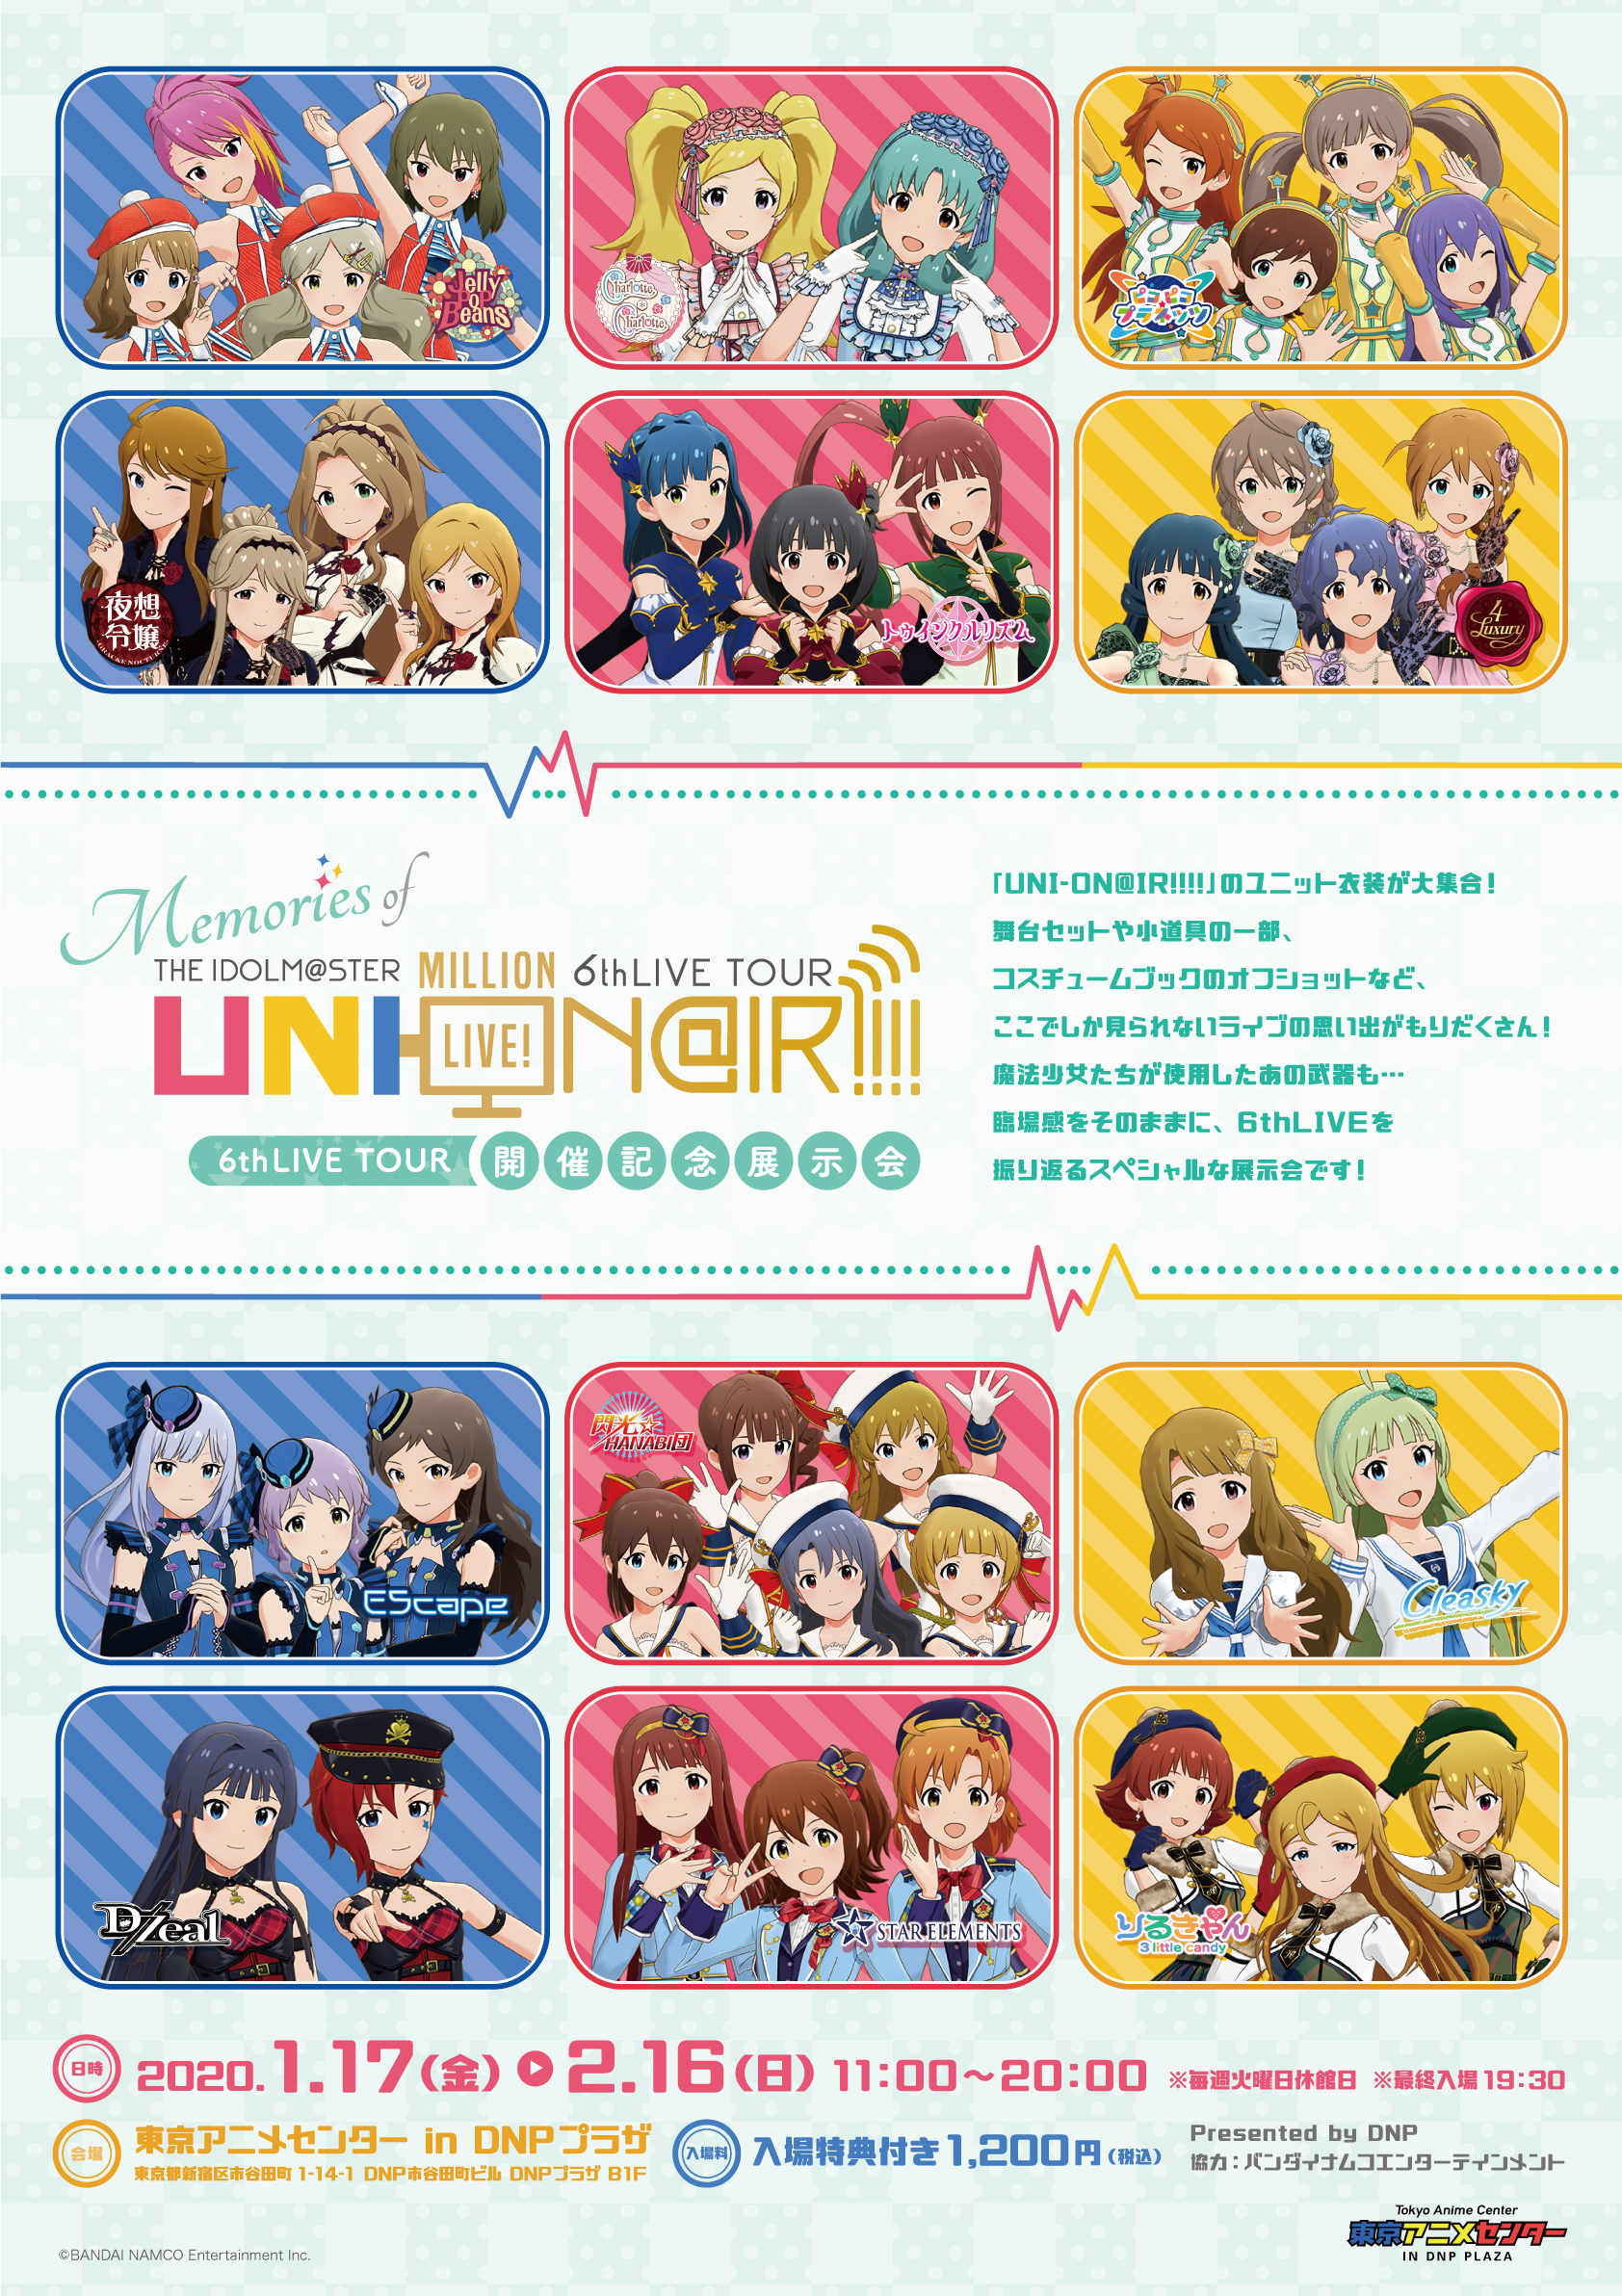 The Idolm Ster Million Live 6thlive Memories Of Uni On Ir